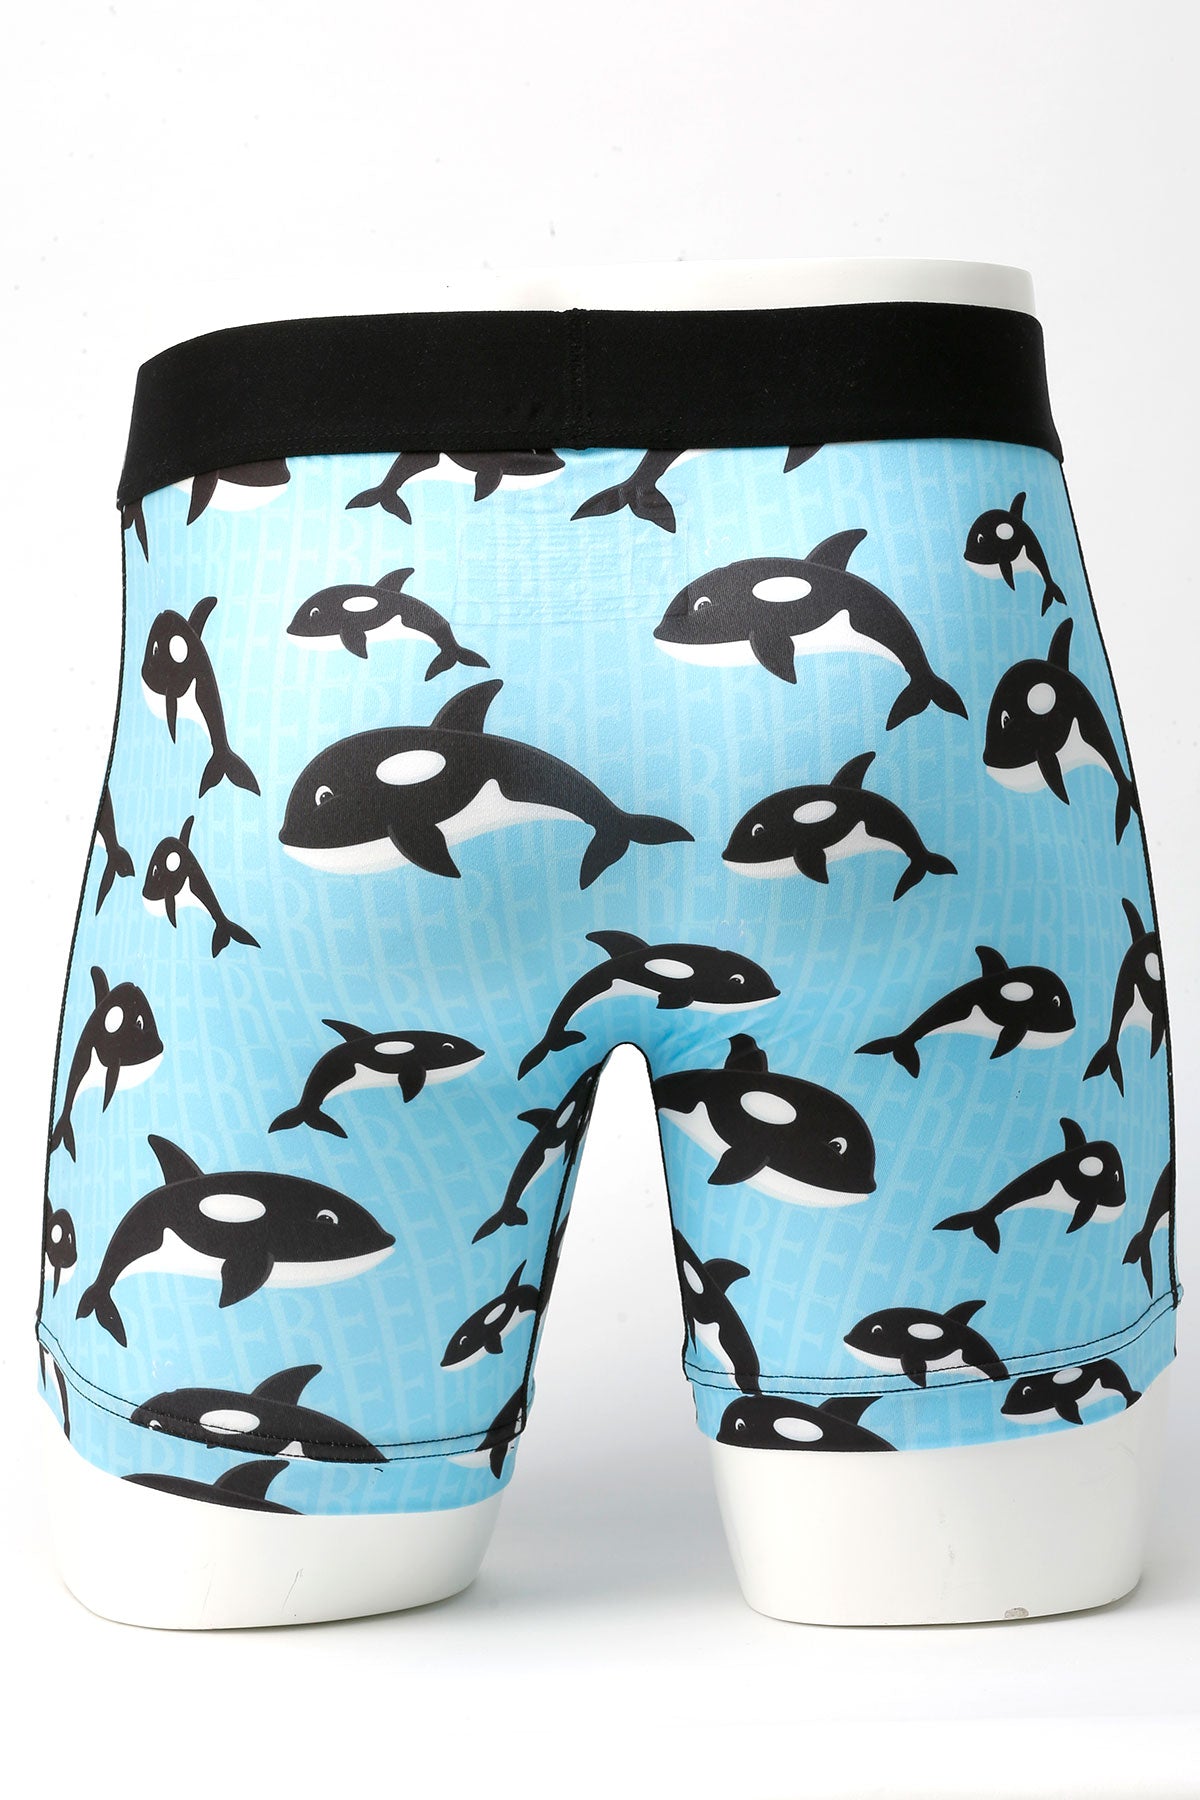 MENS CINCH WILLY 6″ BOXERS